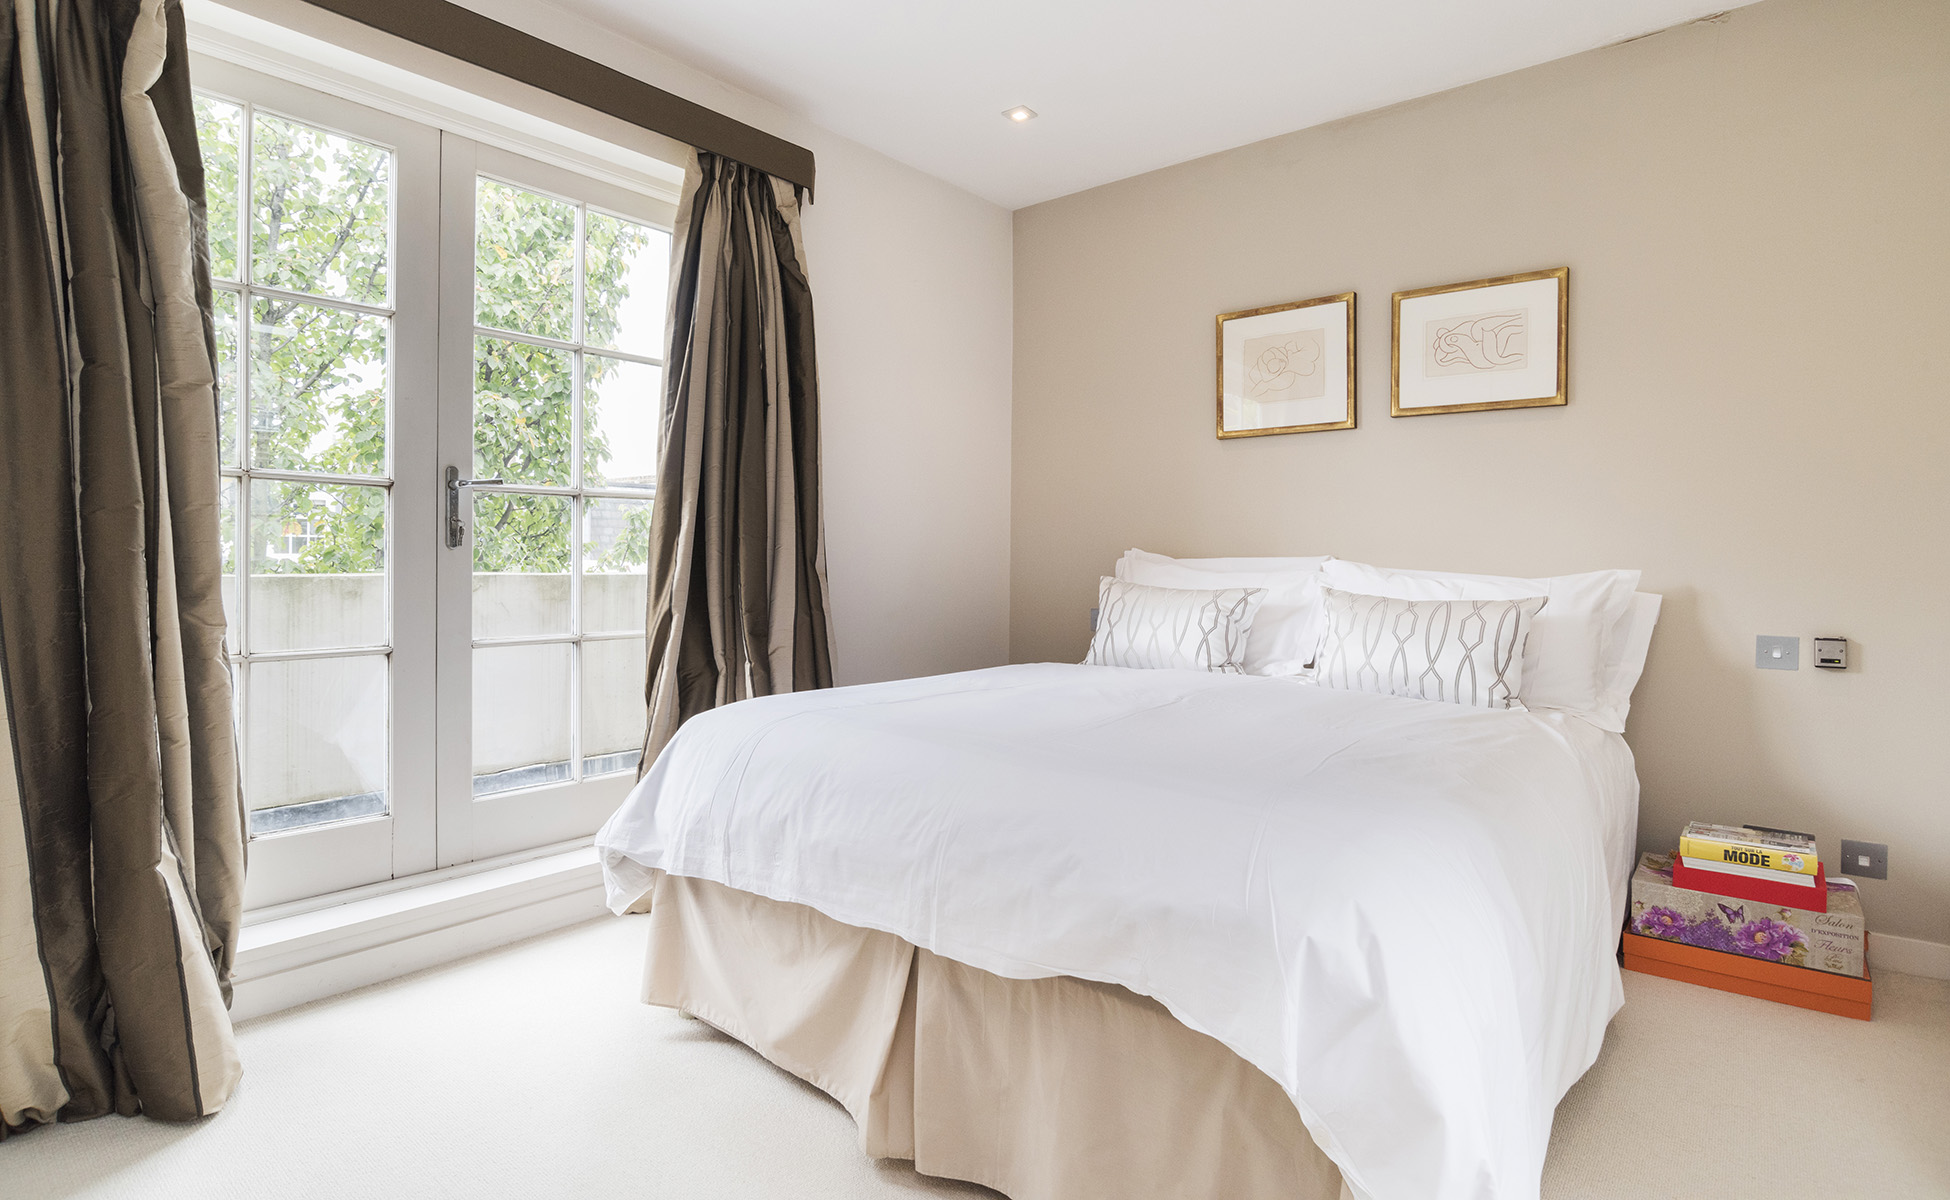 <p>Lovelydays Luxury Rentals introduce you pictures of a charming house in the heart of Chelsea</p>